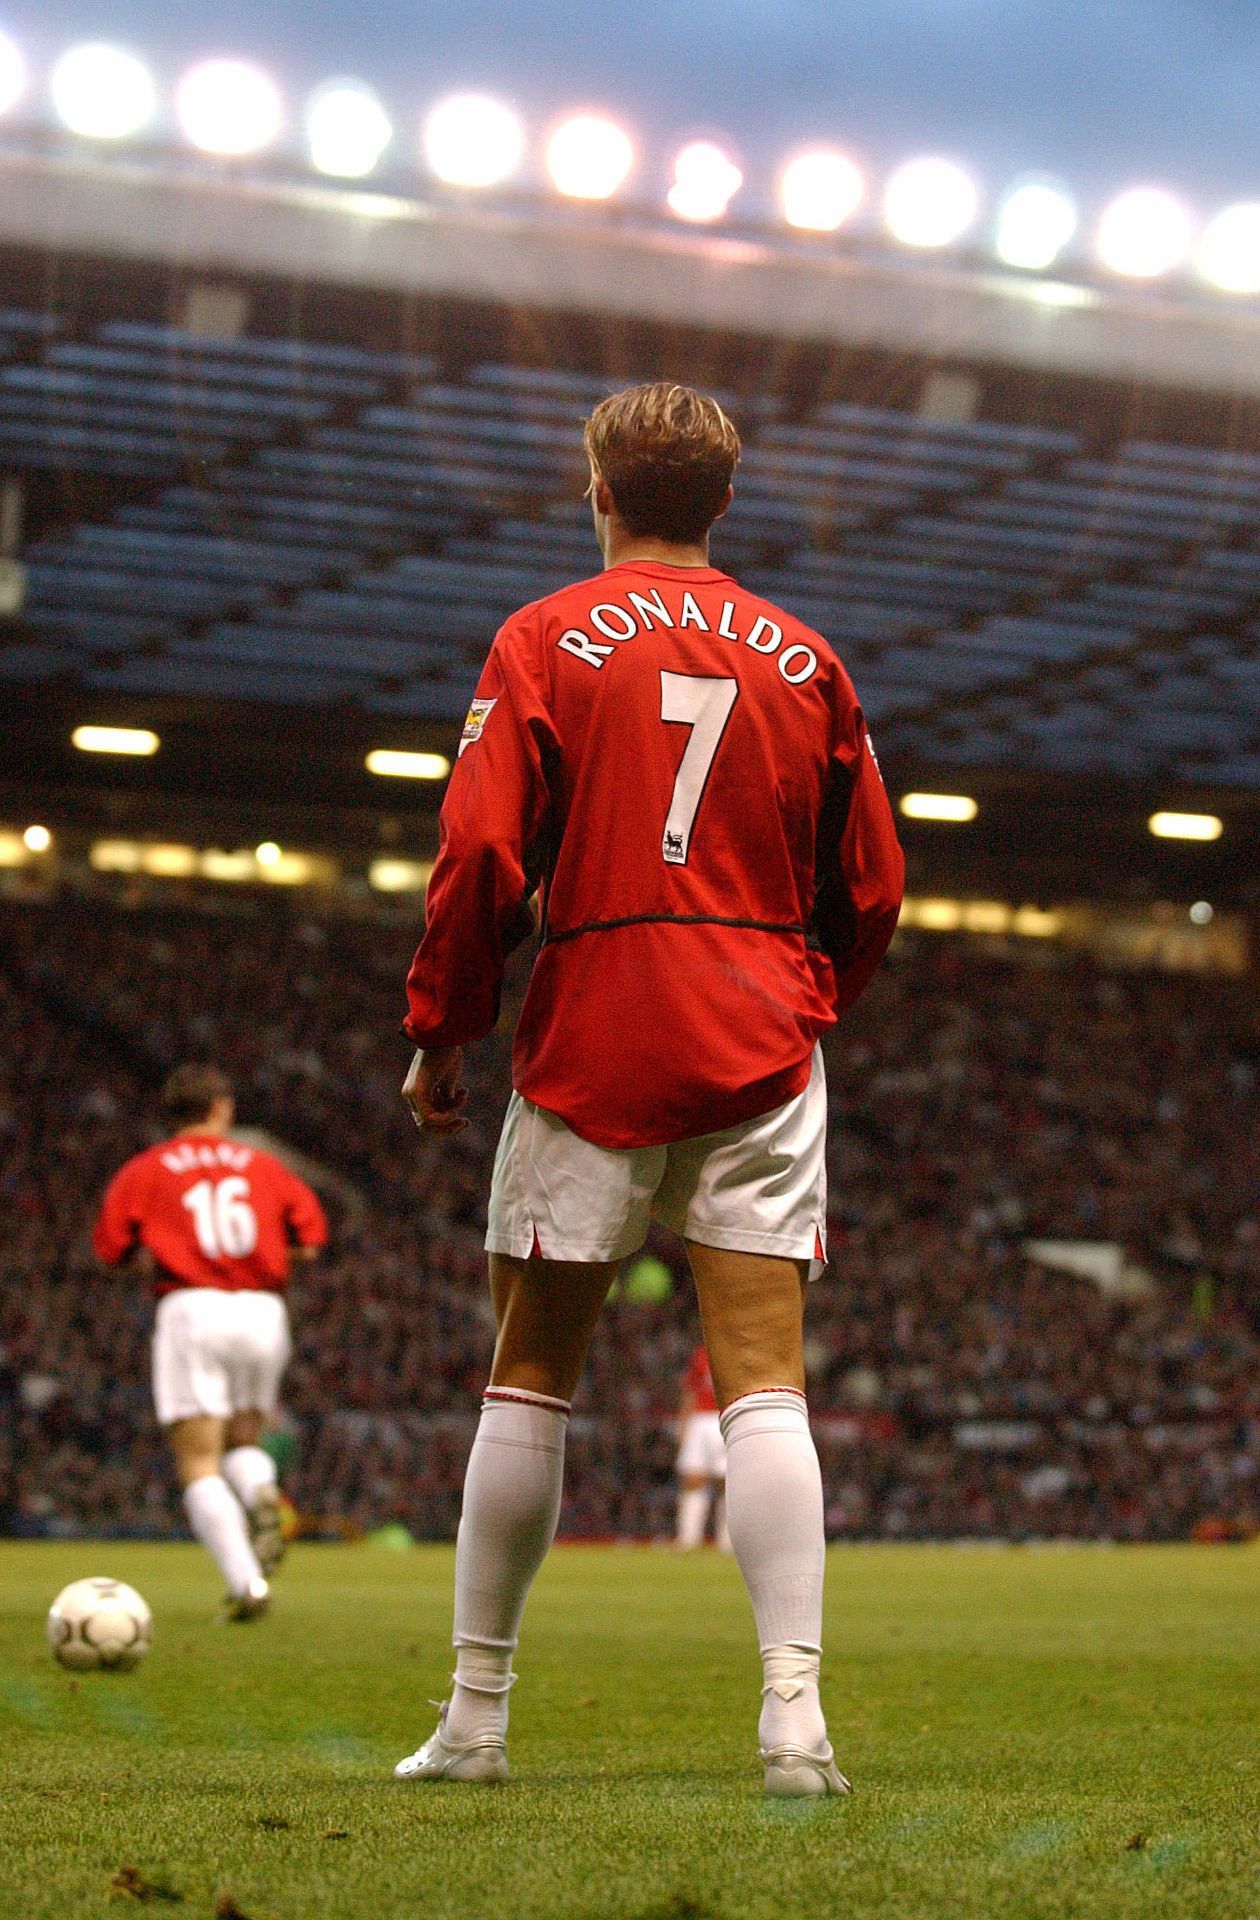 Cristiano Ronaldo wearing his number 7 jersey at Old Trafford in 2004 - Cristiano Ronaldo